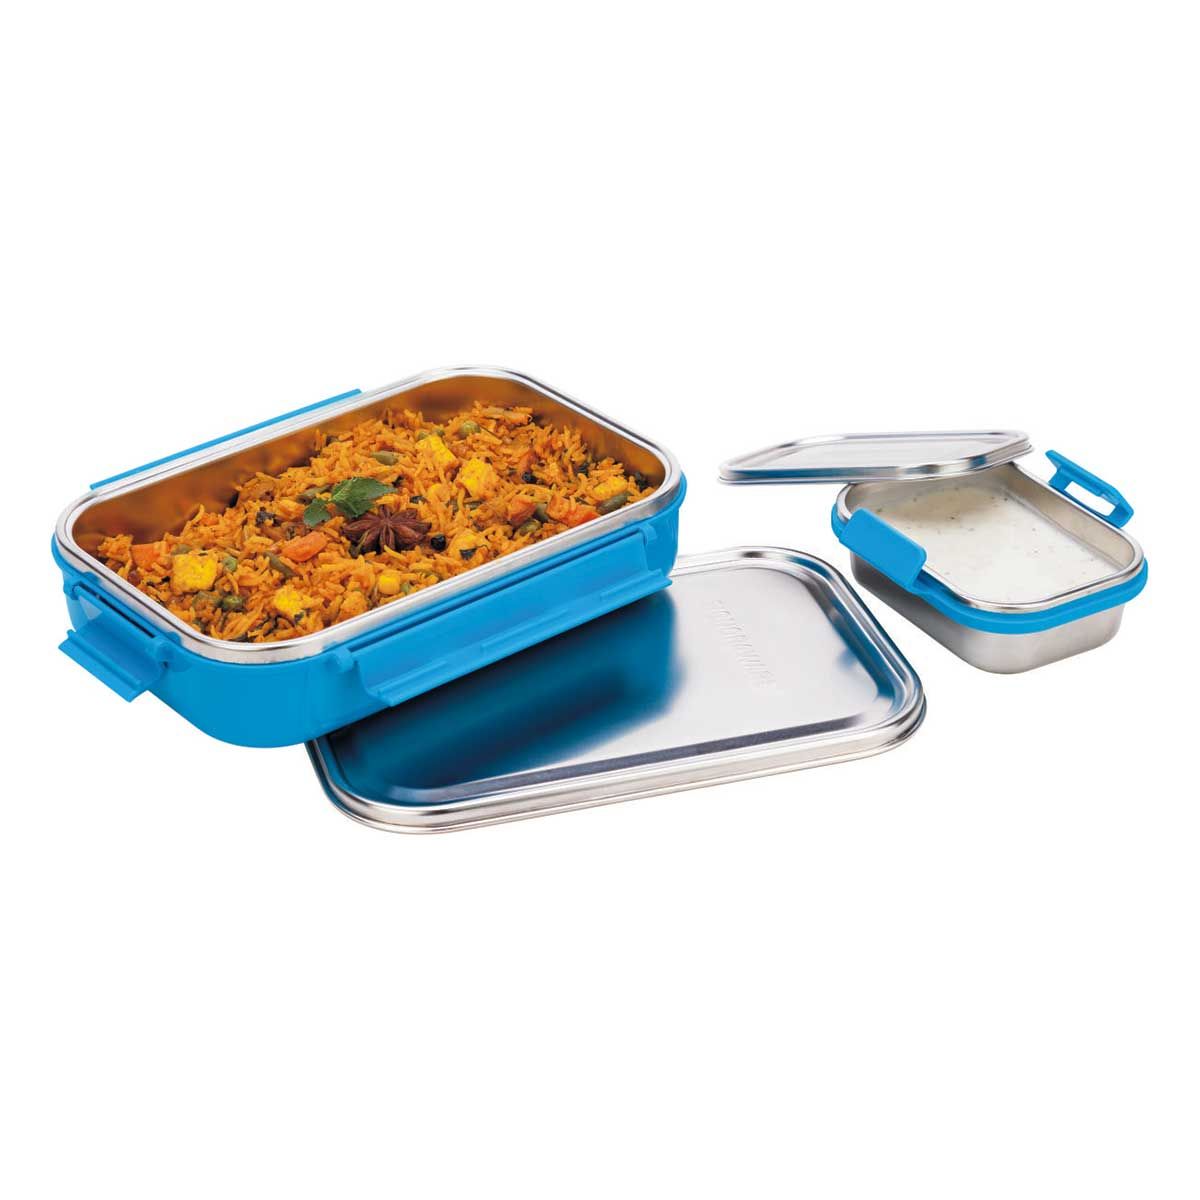 Signoraware All Steel Lunch Box with Steel Lid - 3527